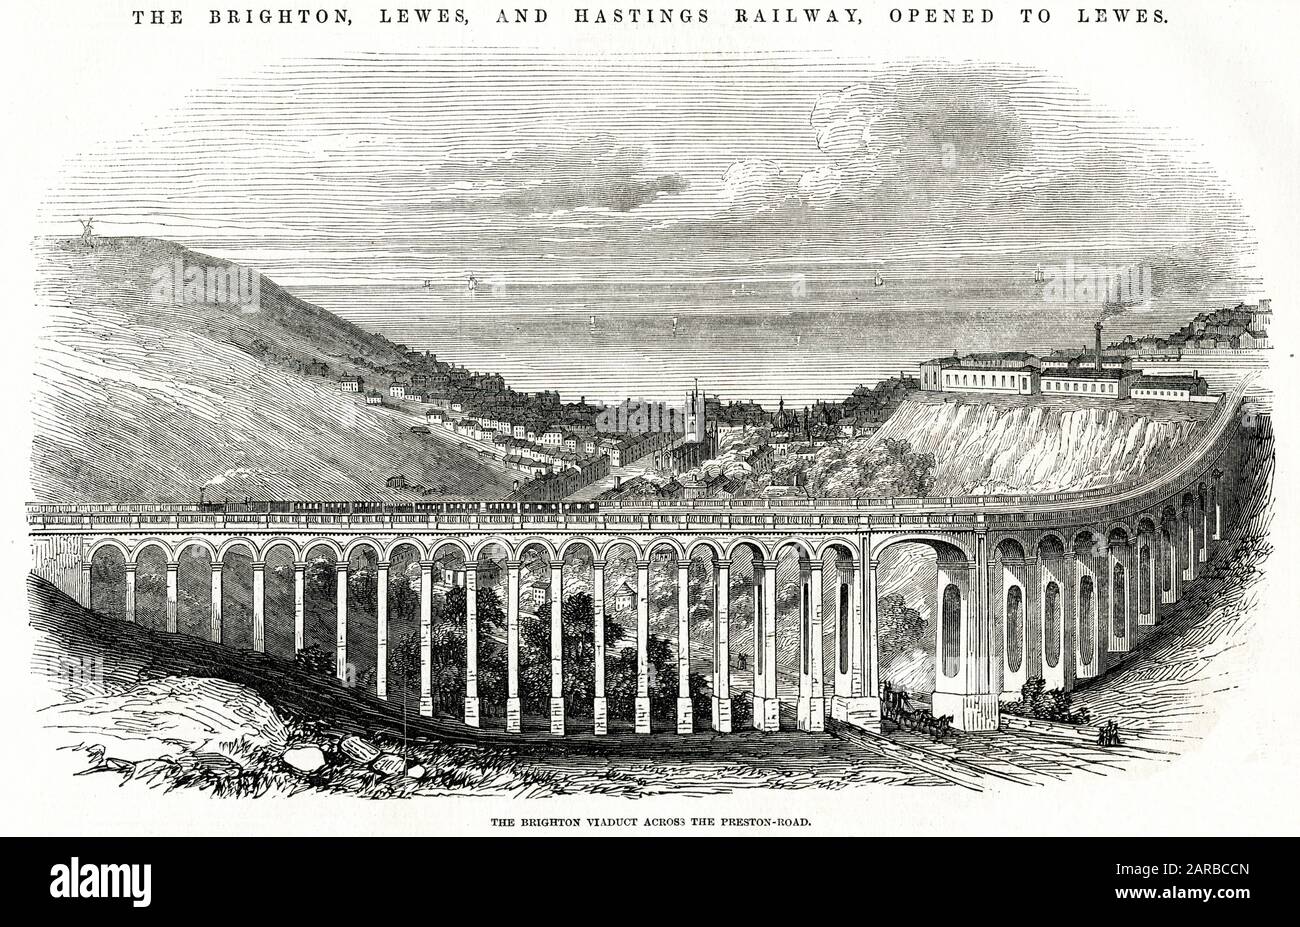 This dramatically sweeping viaduct carries the Brighton, Lewes and Hastings Railway eastwards from Brighton.      Date: 1846 Stock Photo